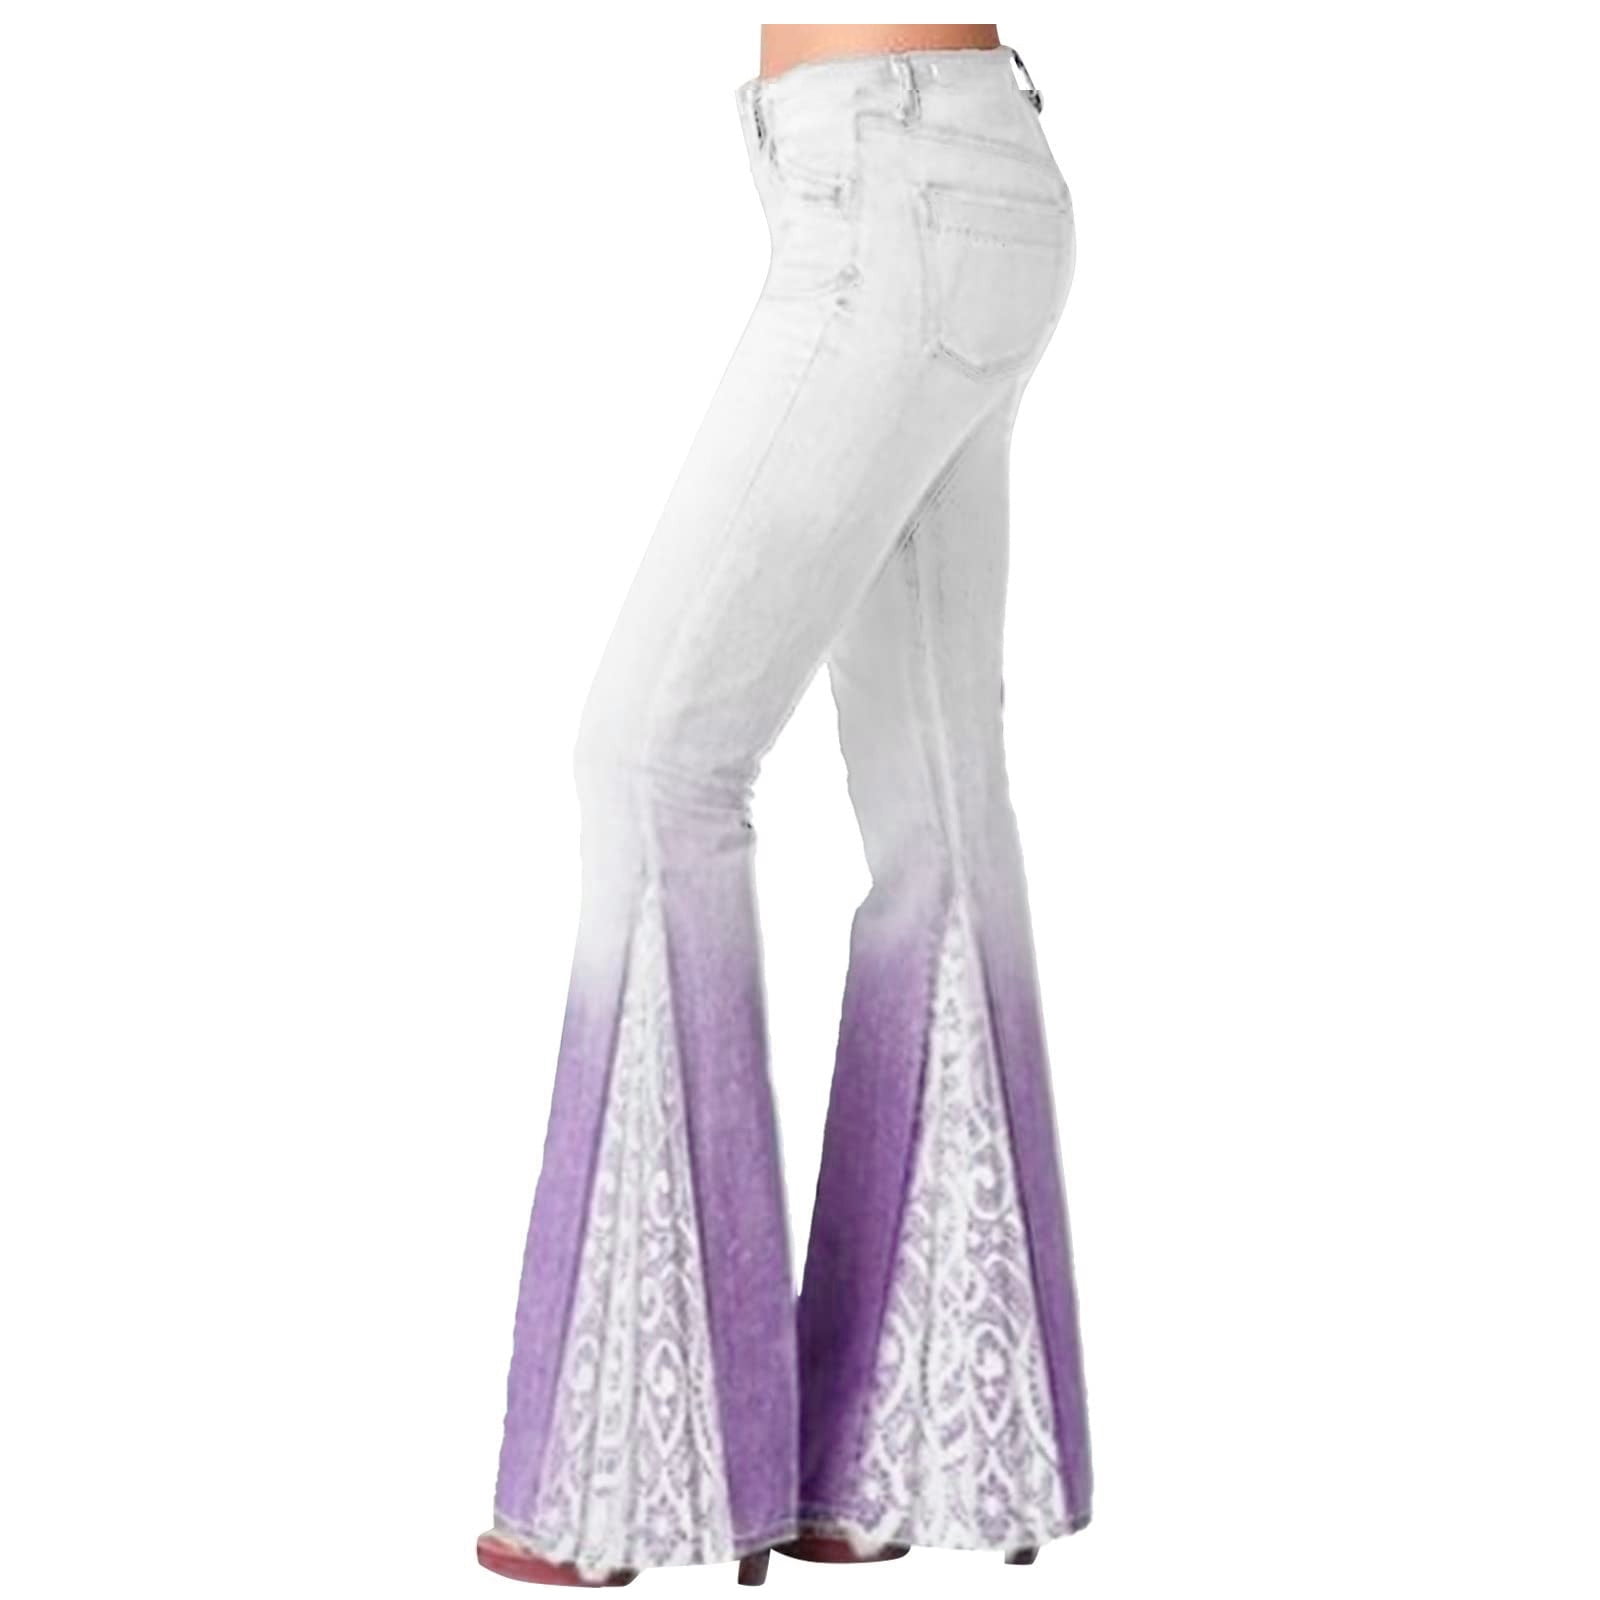 YYDGH Womens Floral Lace Flare Jeans High Waisted Stretch Bell